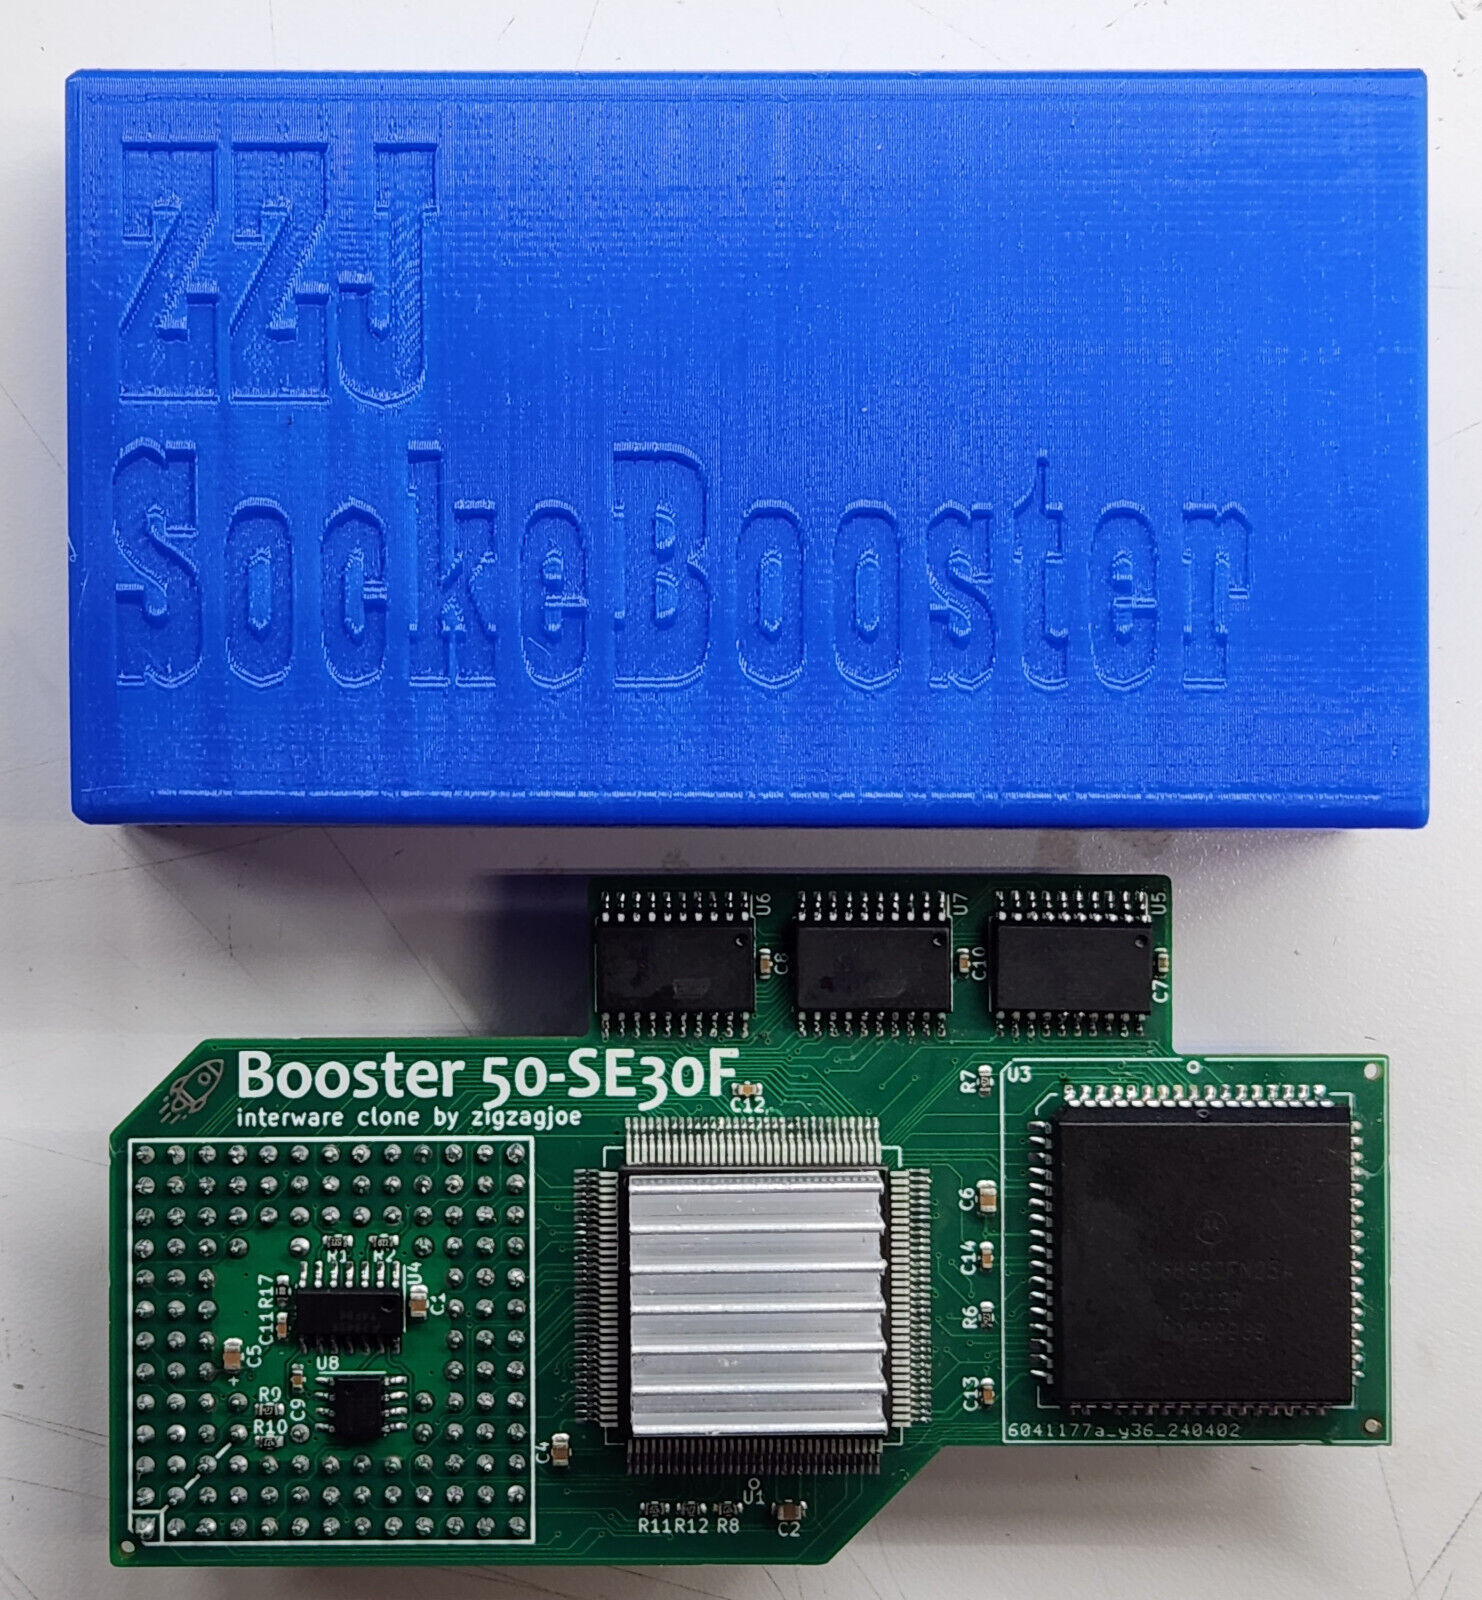 New Socketed Booster 50-SE30F Accelerator for Apple Macintosh SE/30 and IIx+FPU